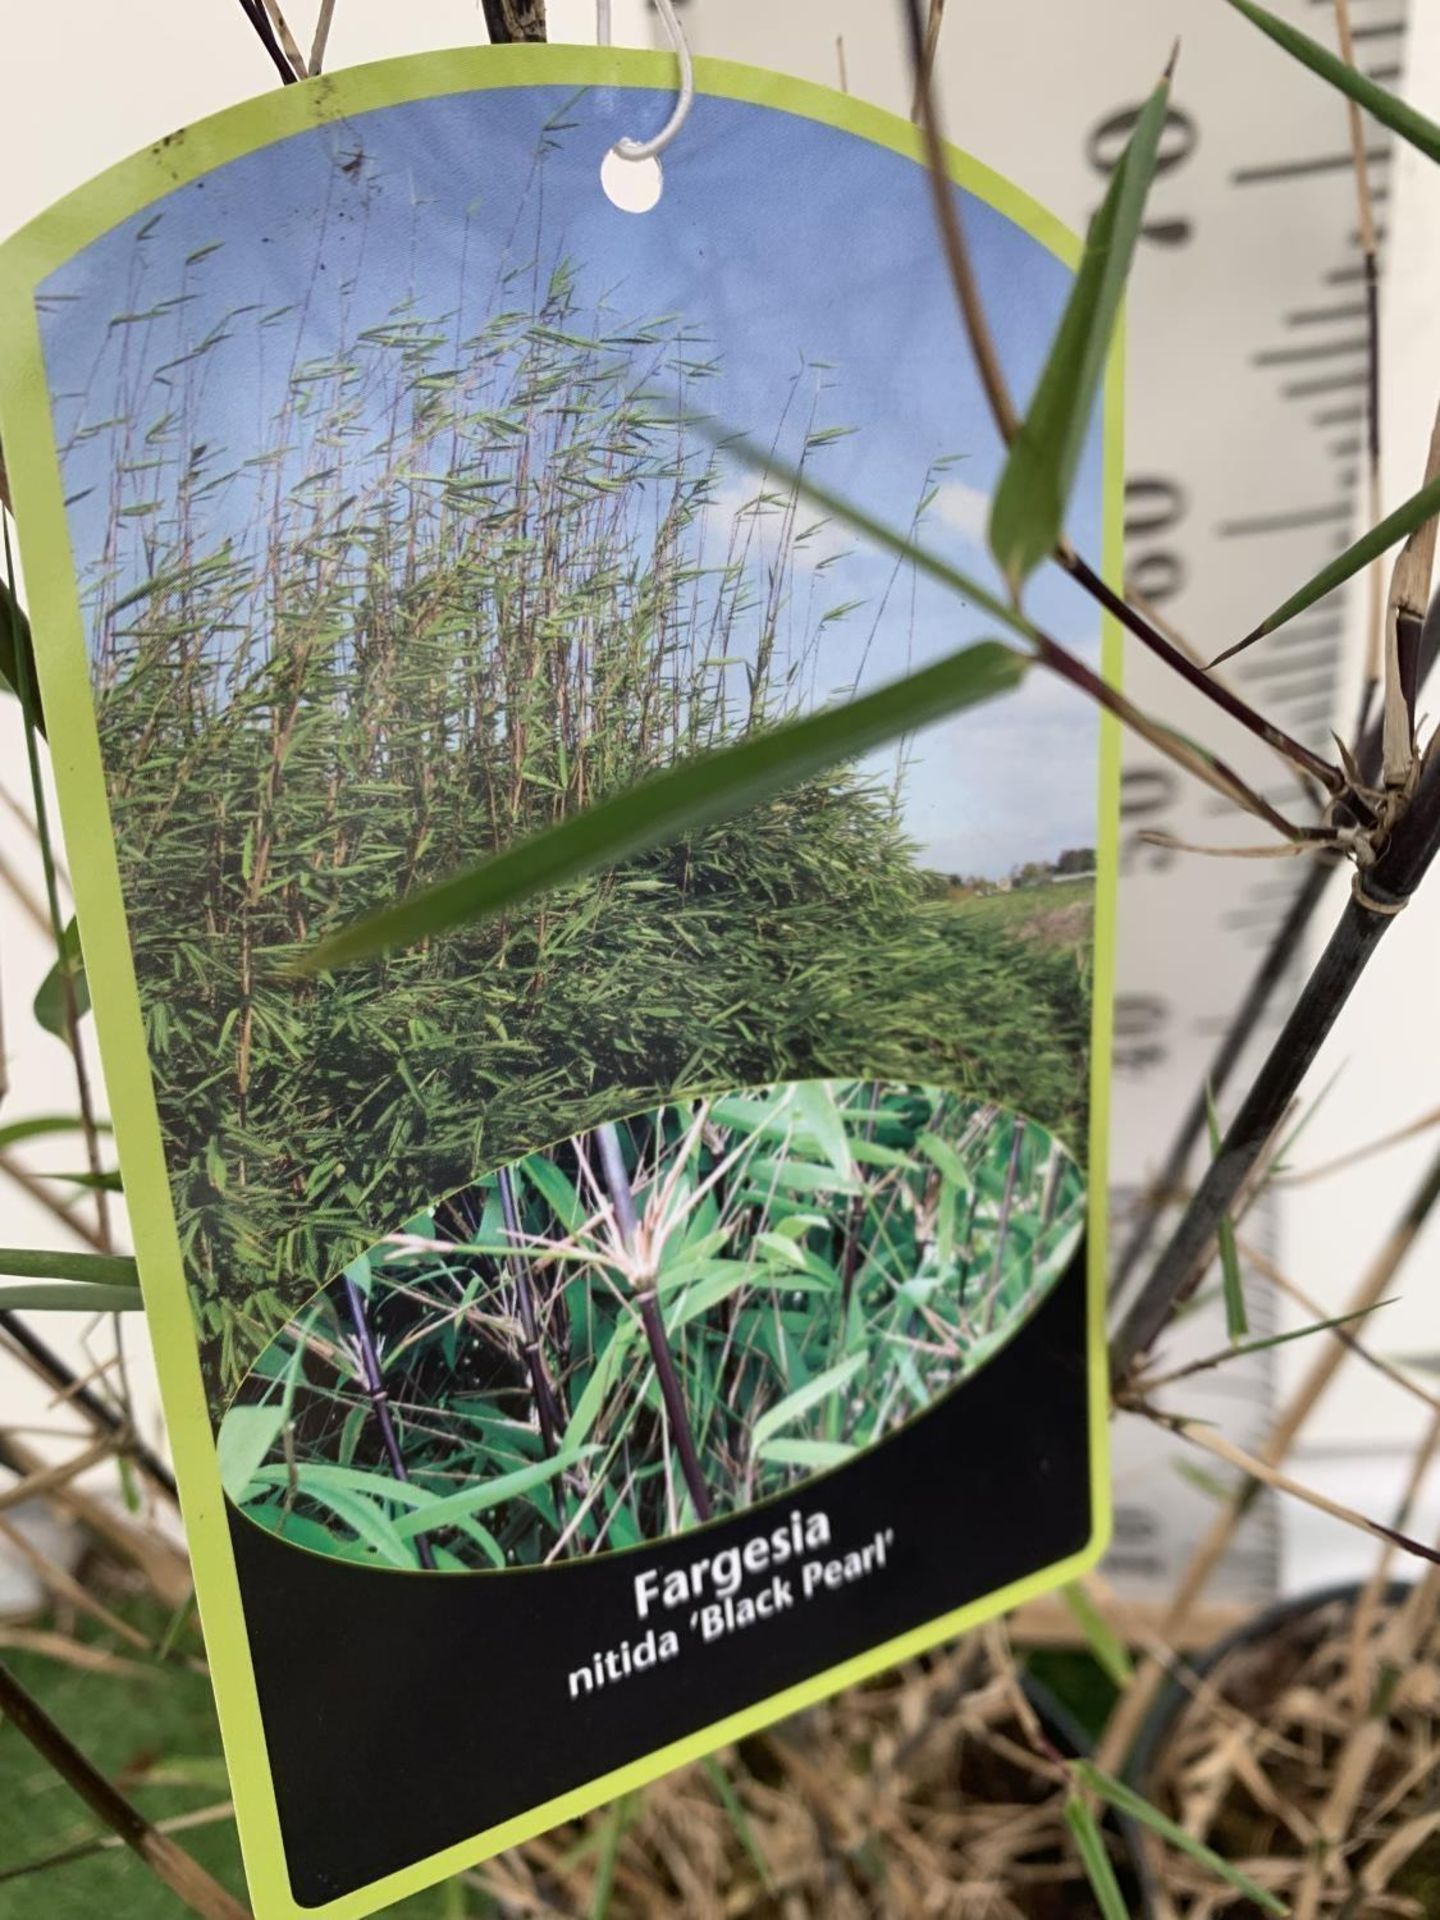 TWO BAMBOO FARGESIA NITIDA 'BLACK PEARL' APPROX 190CM IN HEIGHT IN 5 LTR POTS PLUS VAT TO BE SOLD - Image 9 of 10